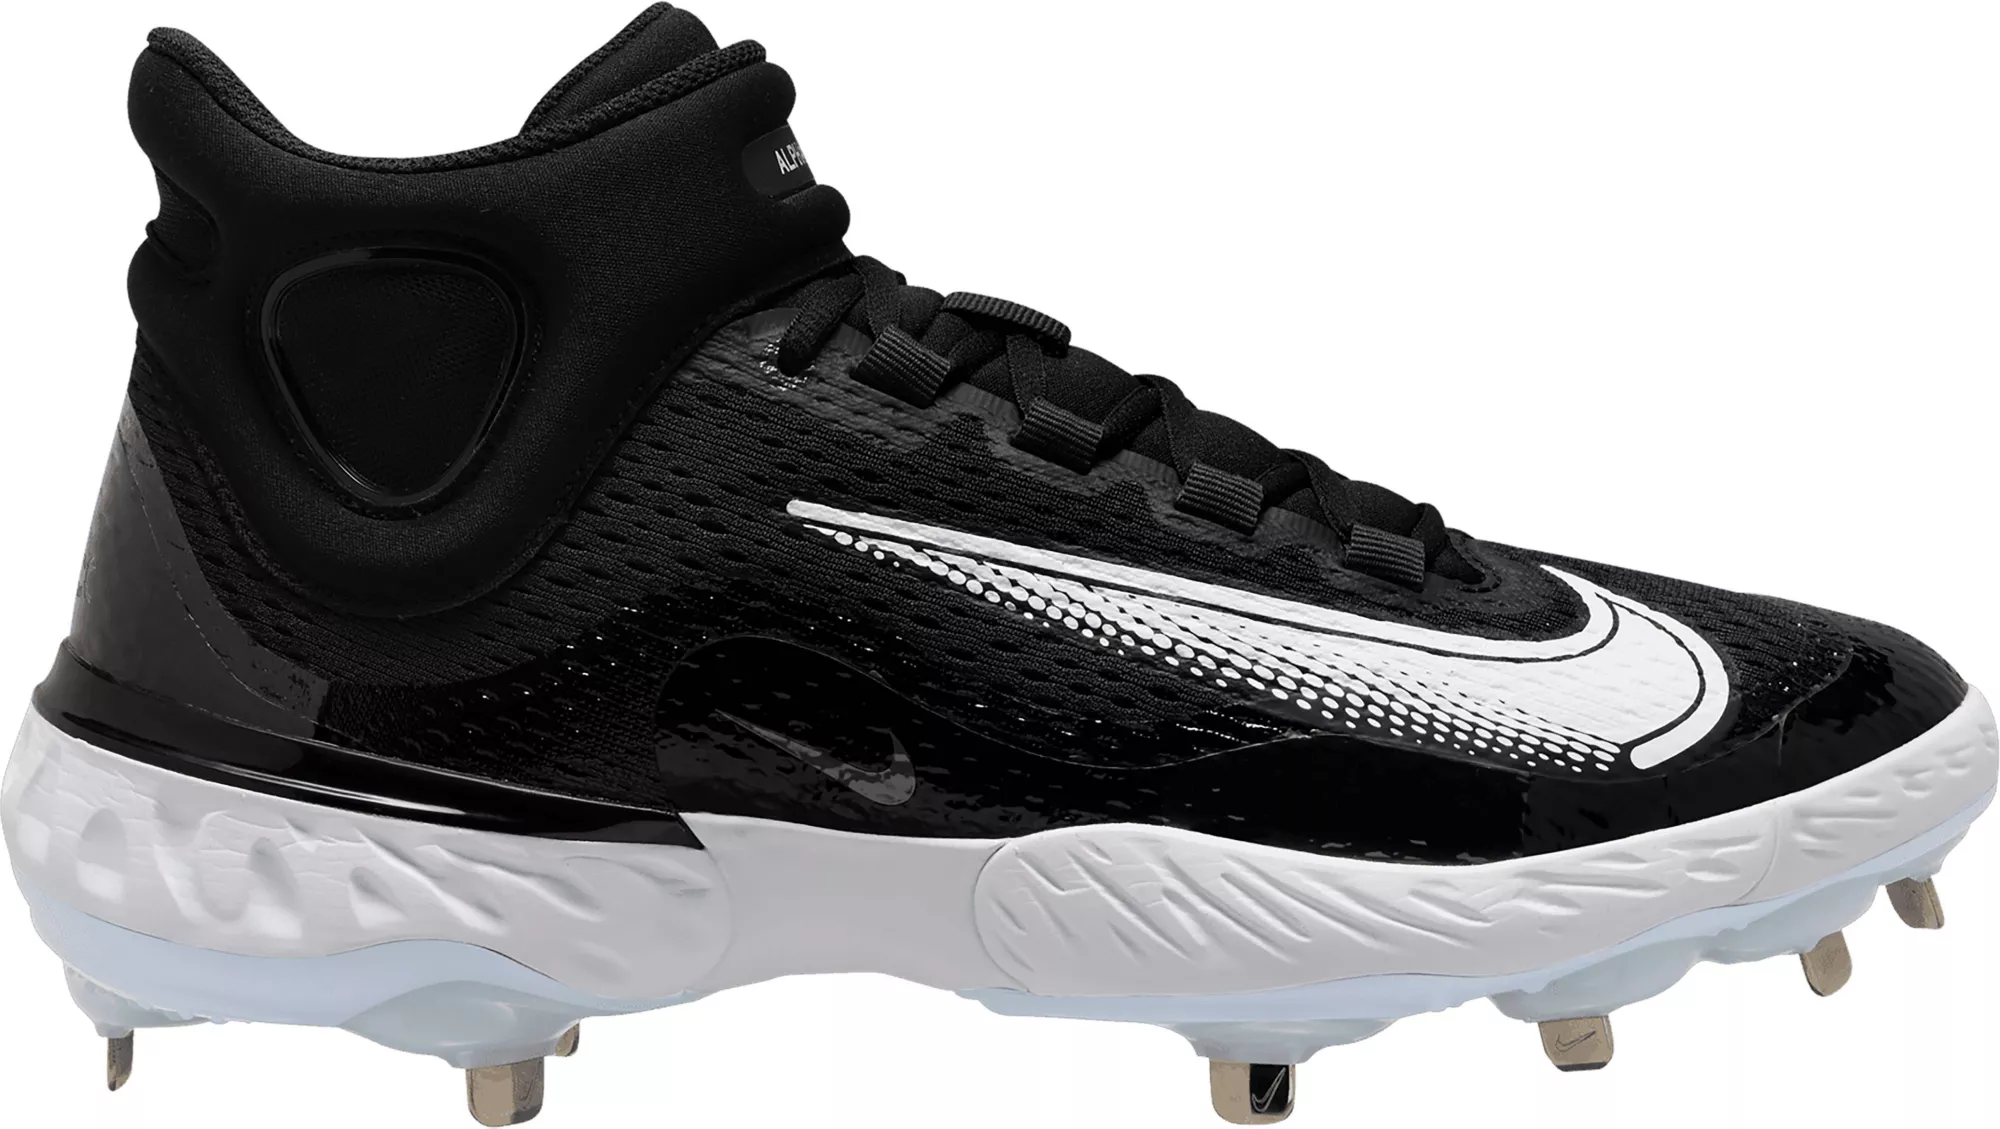 How To Choose Baseball Cleats Based on Type & Position